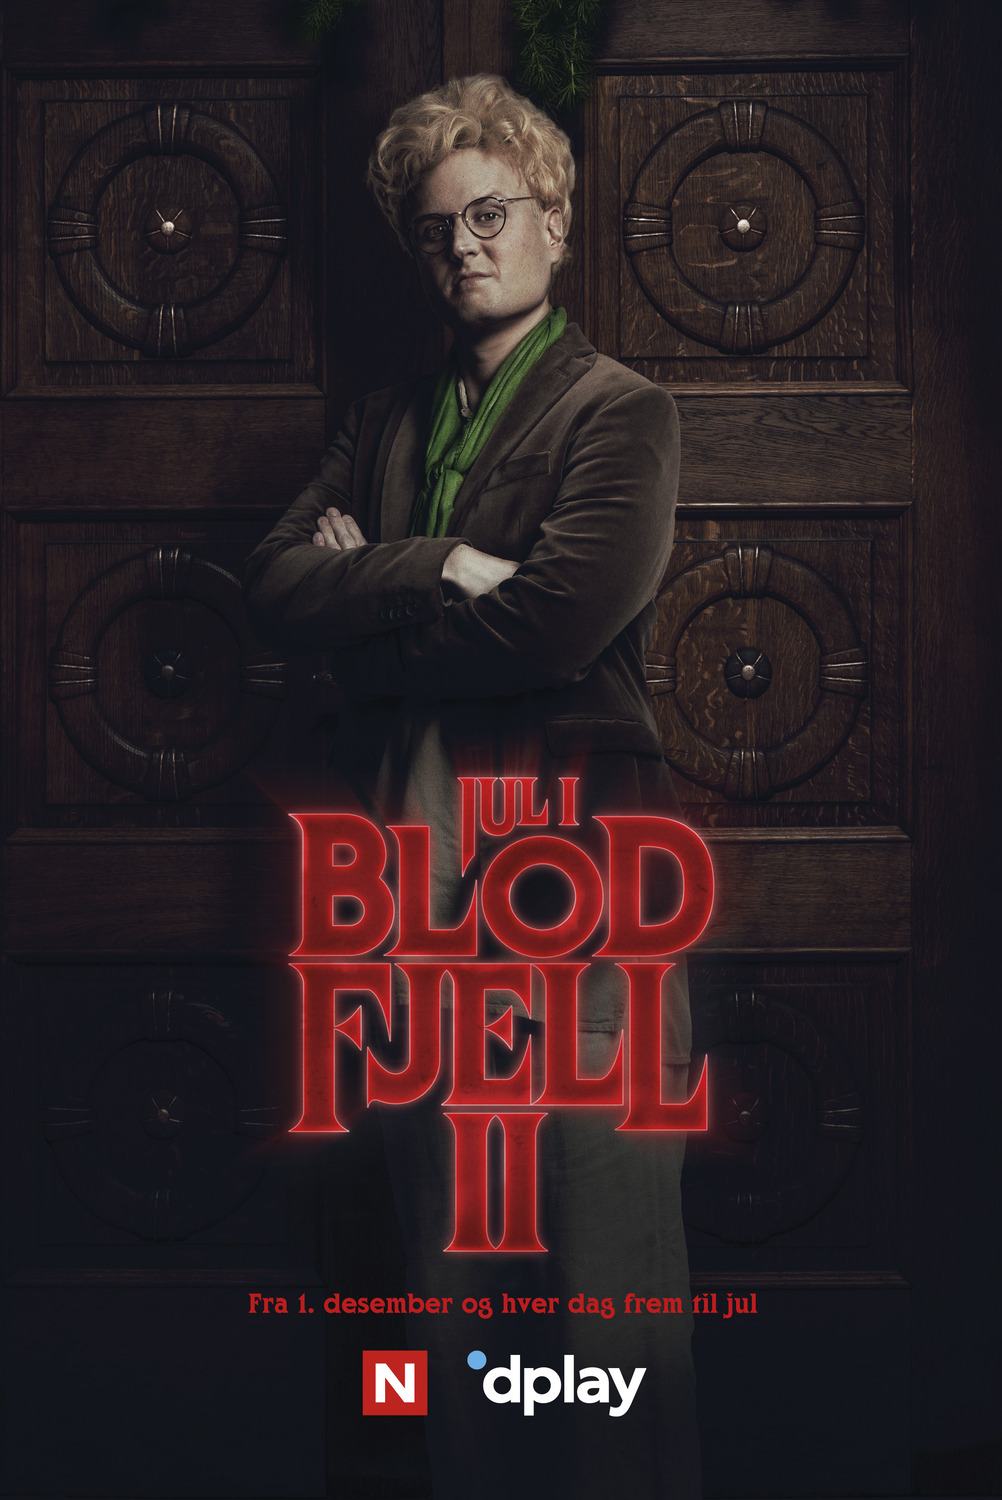 Extra Large TV Poster Image for Jul i Blodfjell (#2 of 11)